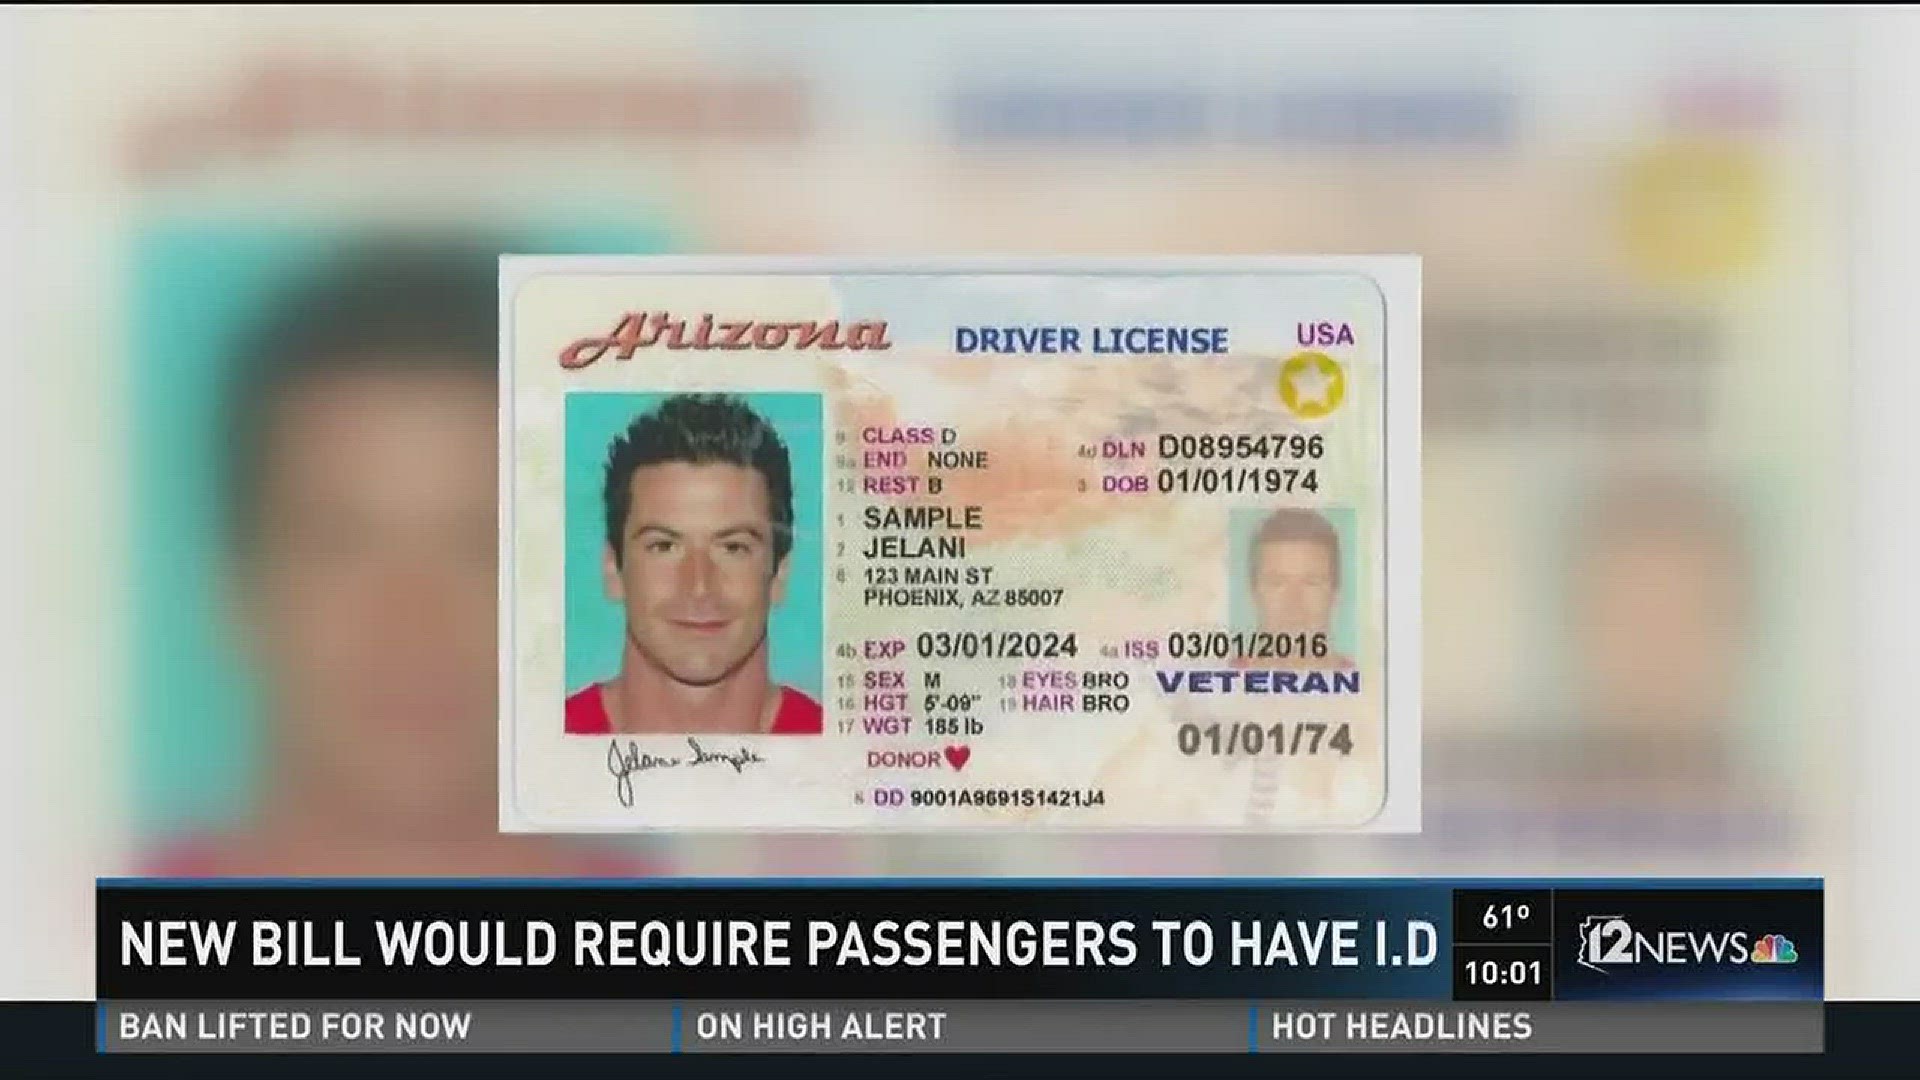 New bill would require passengers to have I.D.